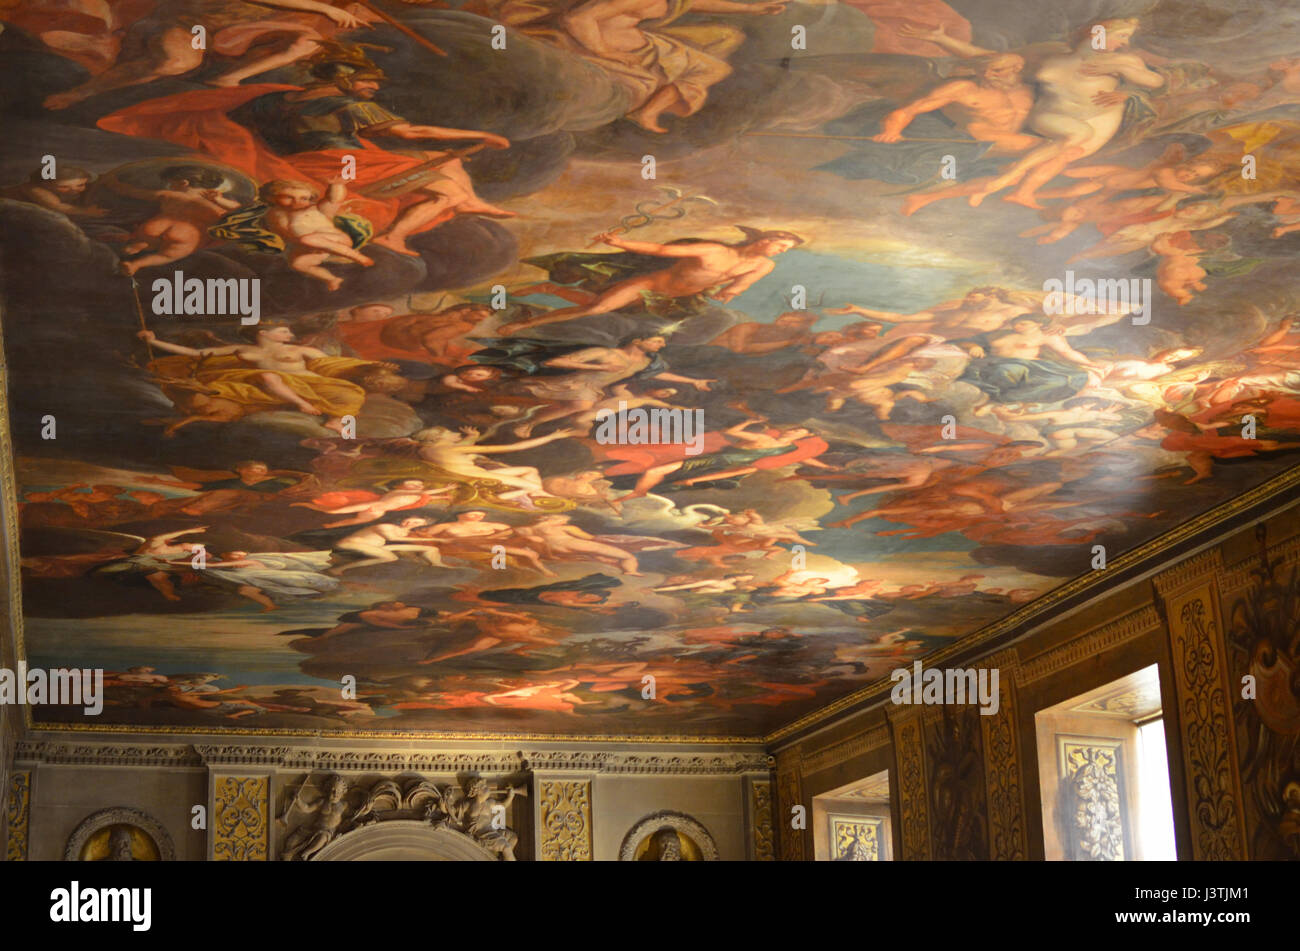 Chatsworth House Interior High Resolution Stock Photography And Images Alamy